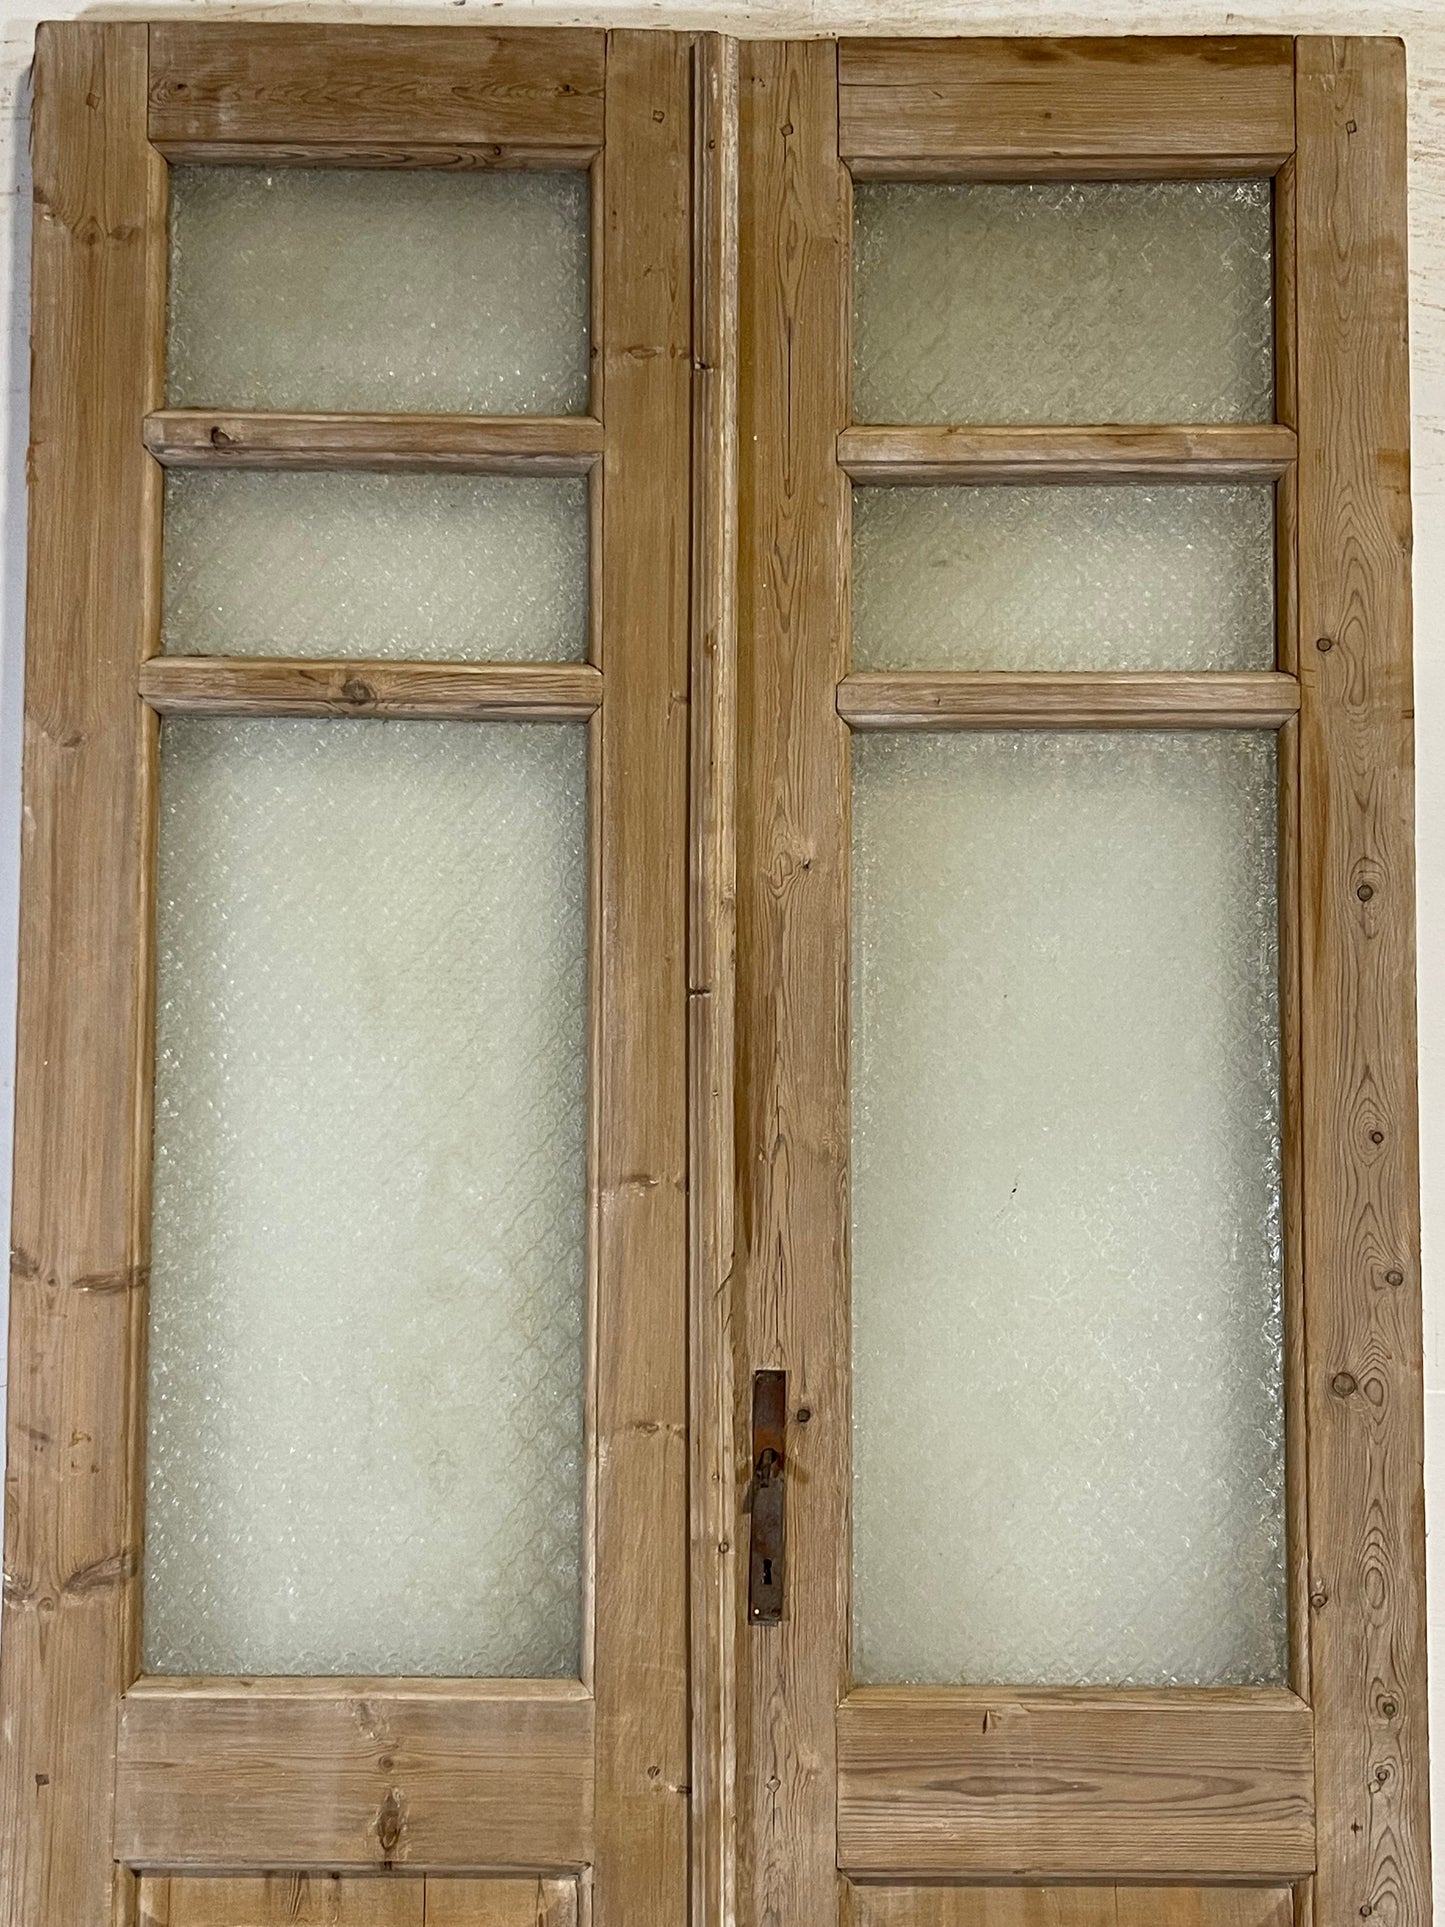 Antique French panel doors with glass (91x43.75) L193